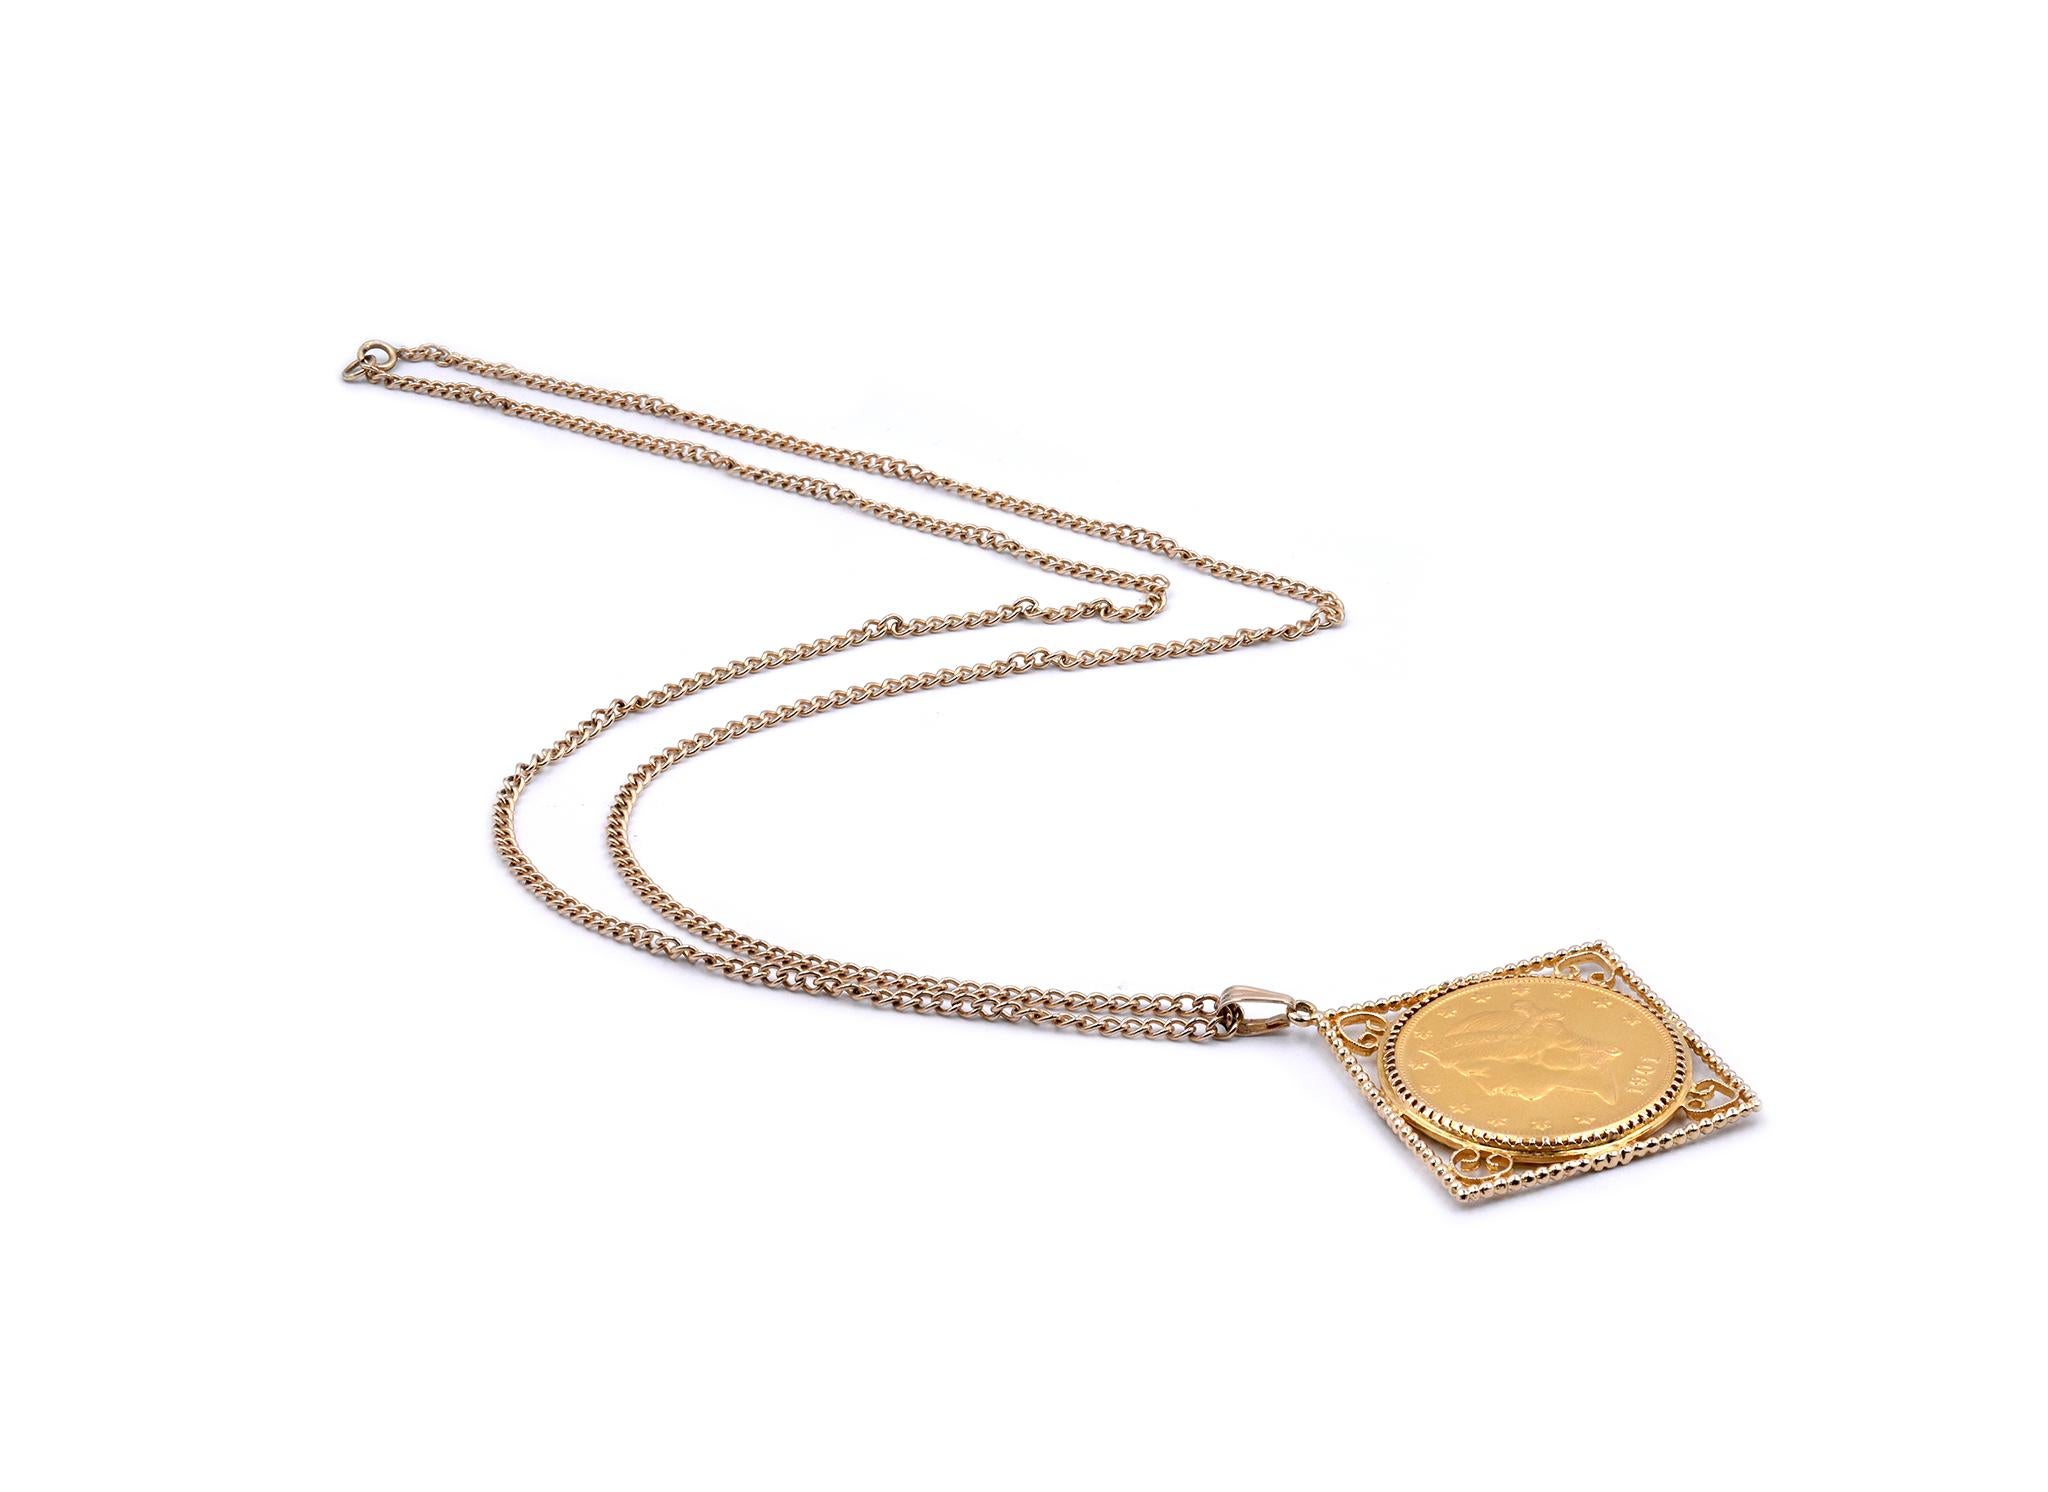 Designer: custom design
Material: 14K yellow gold
Dimensions: necklace is 32-inches long, bezel measures 55.50mm wide at the widest point
Weight: 58.62 grams
